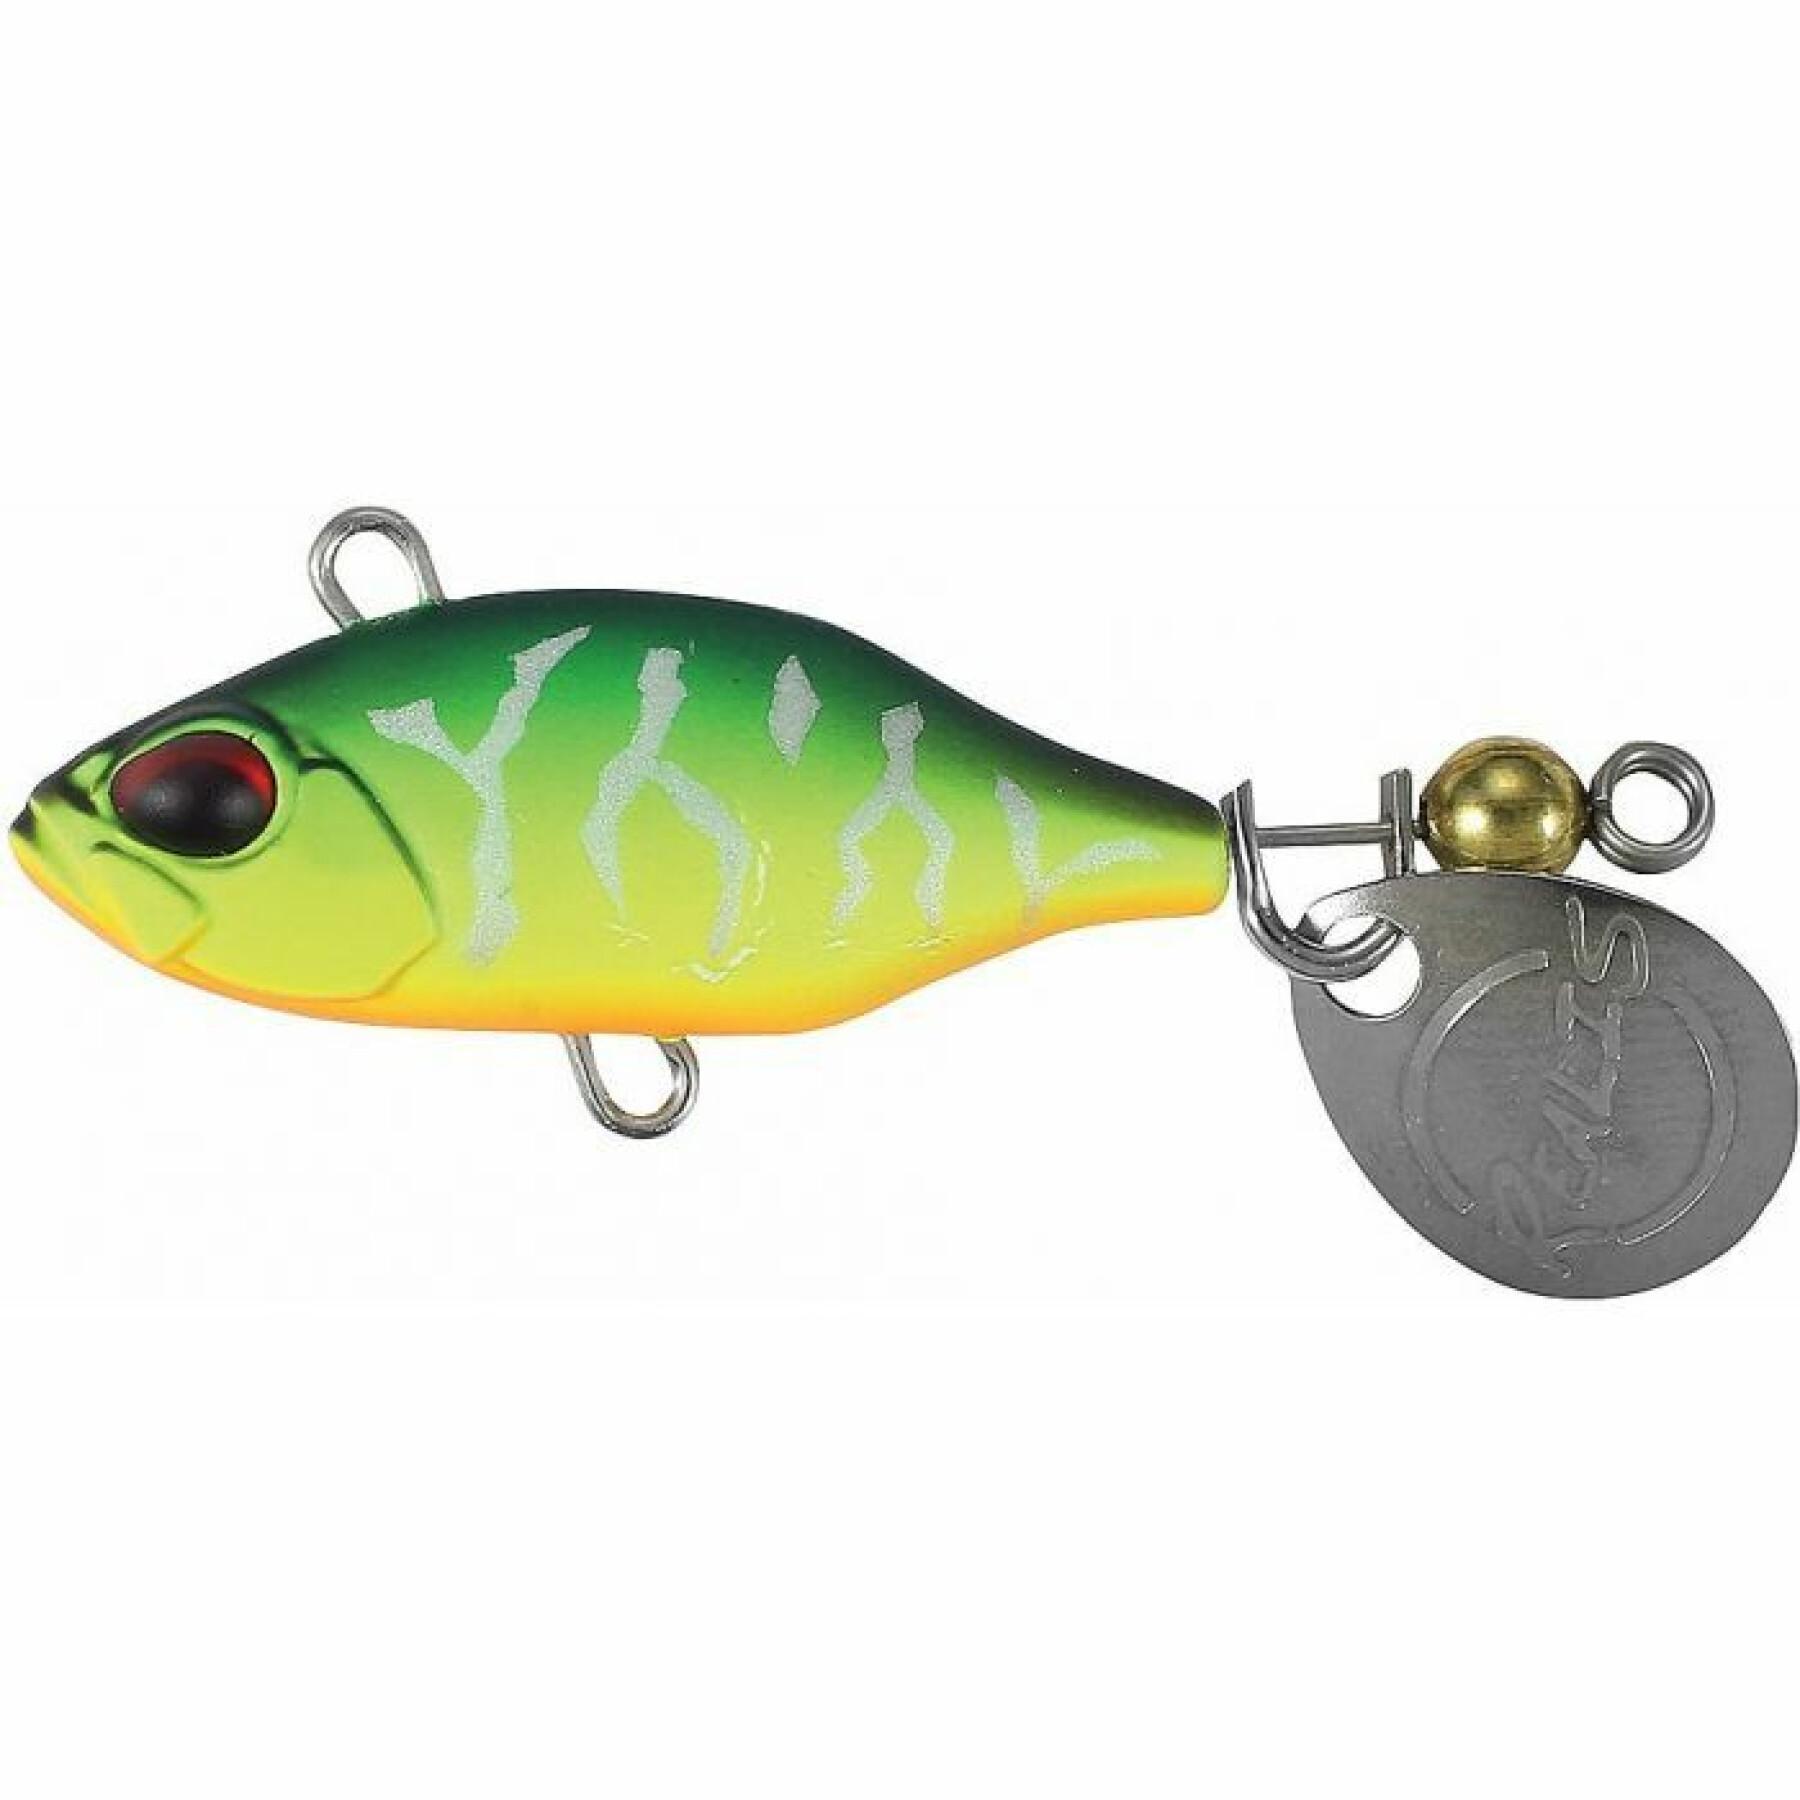 Duo realis spin lure - 14g